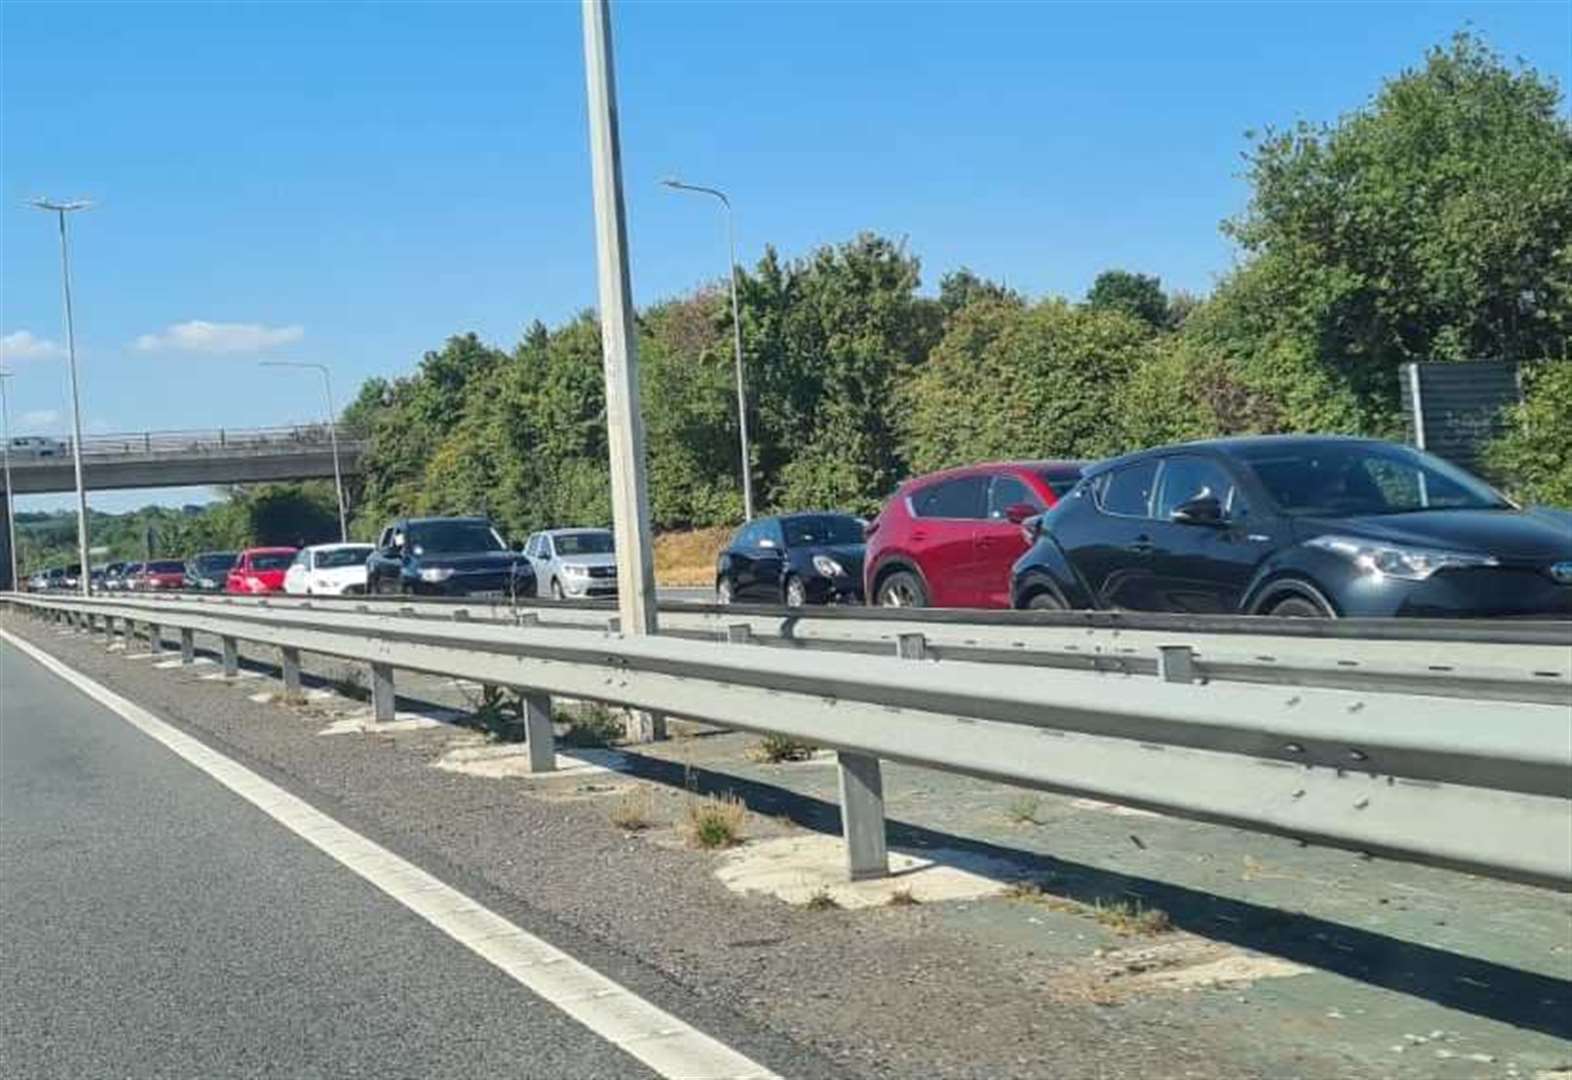 Two-mile queues amid closures on 'sinking' dual-carriageway